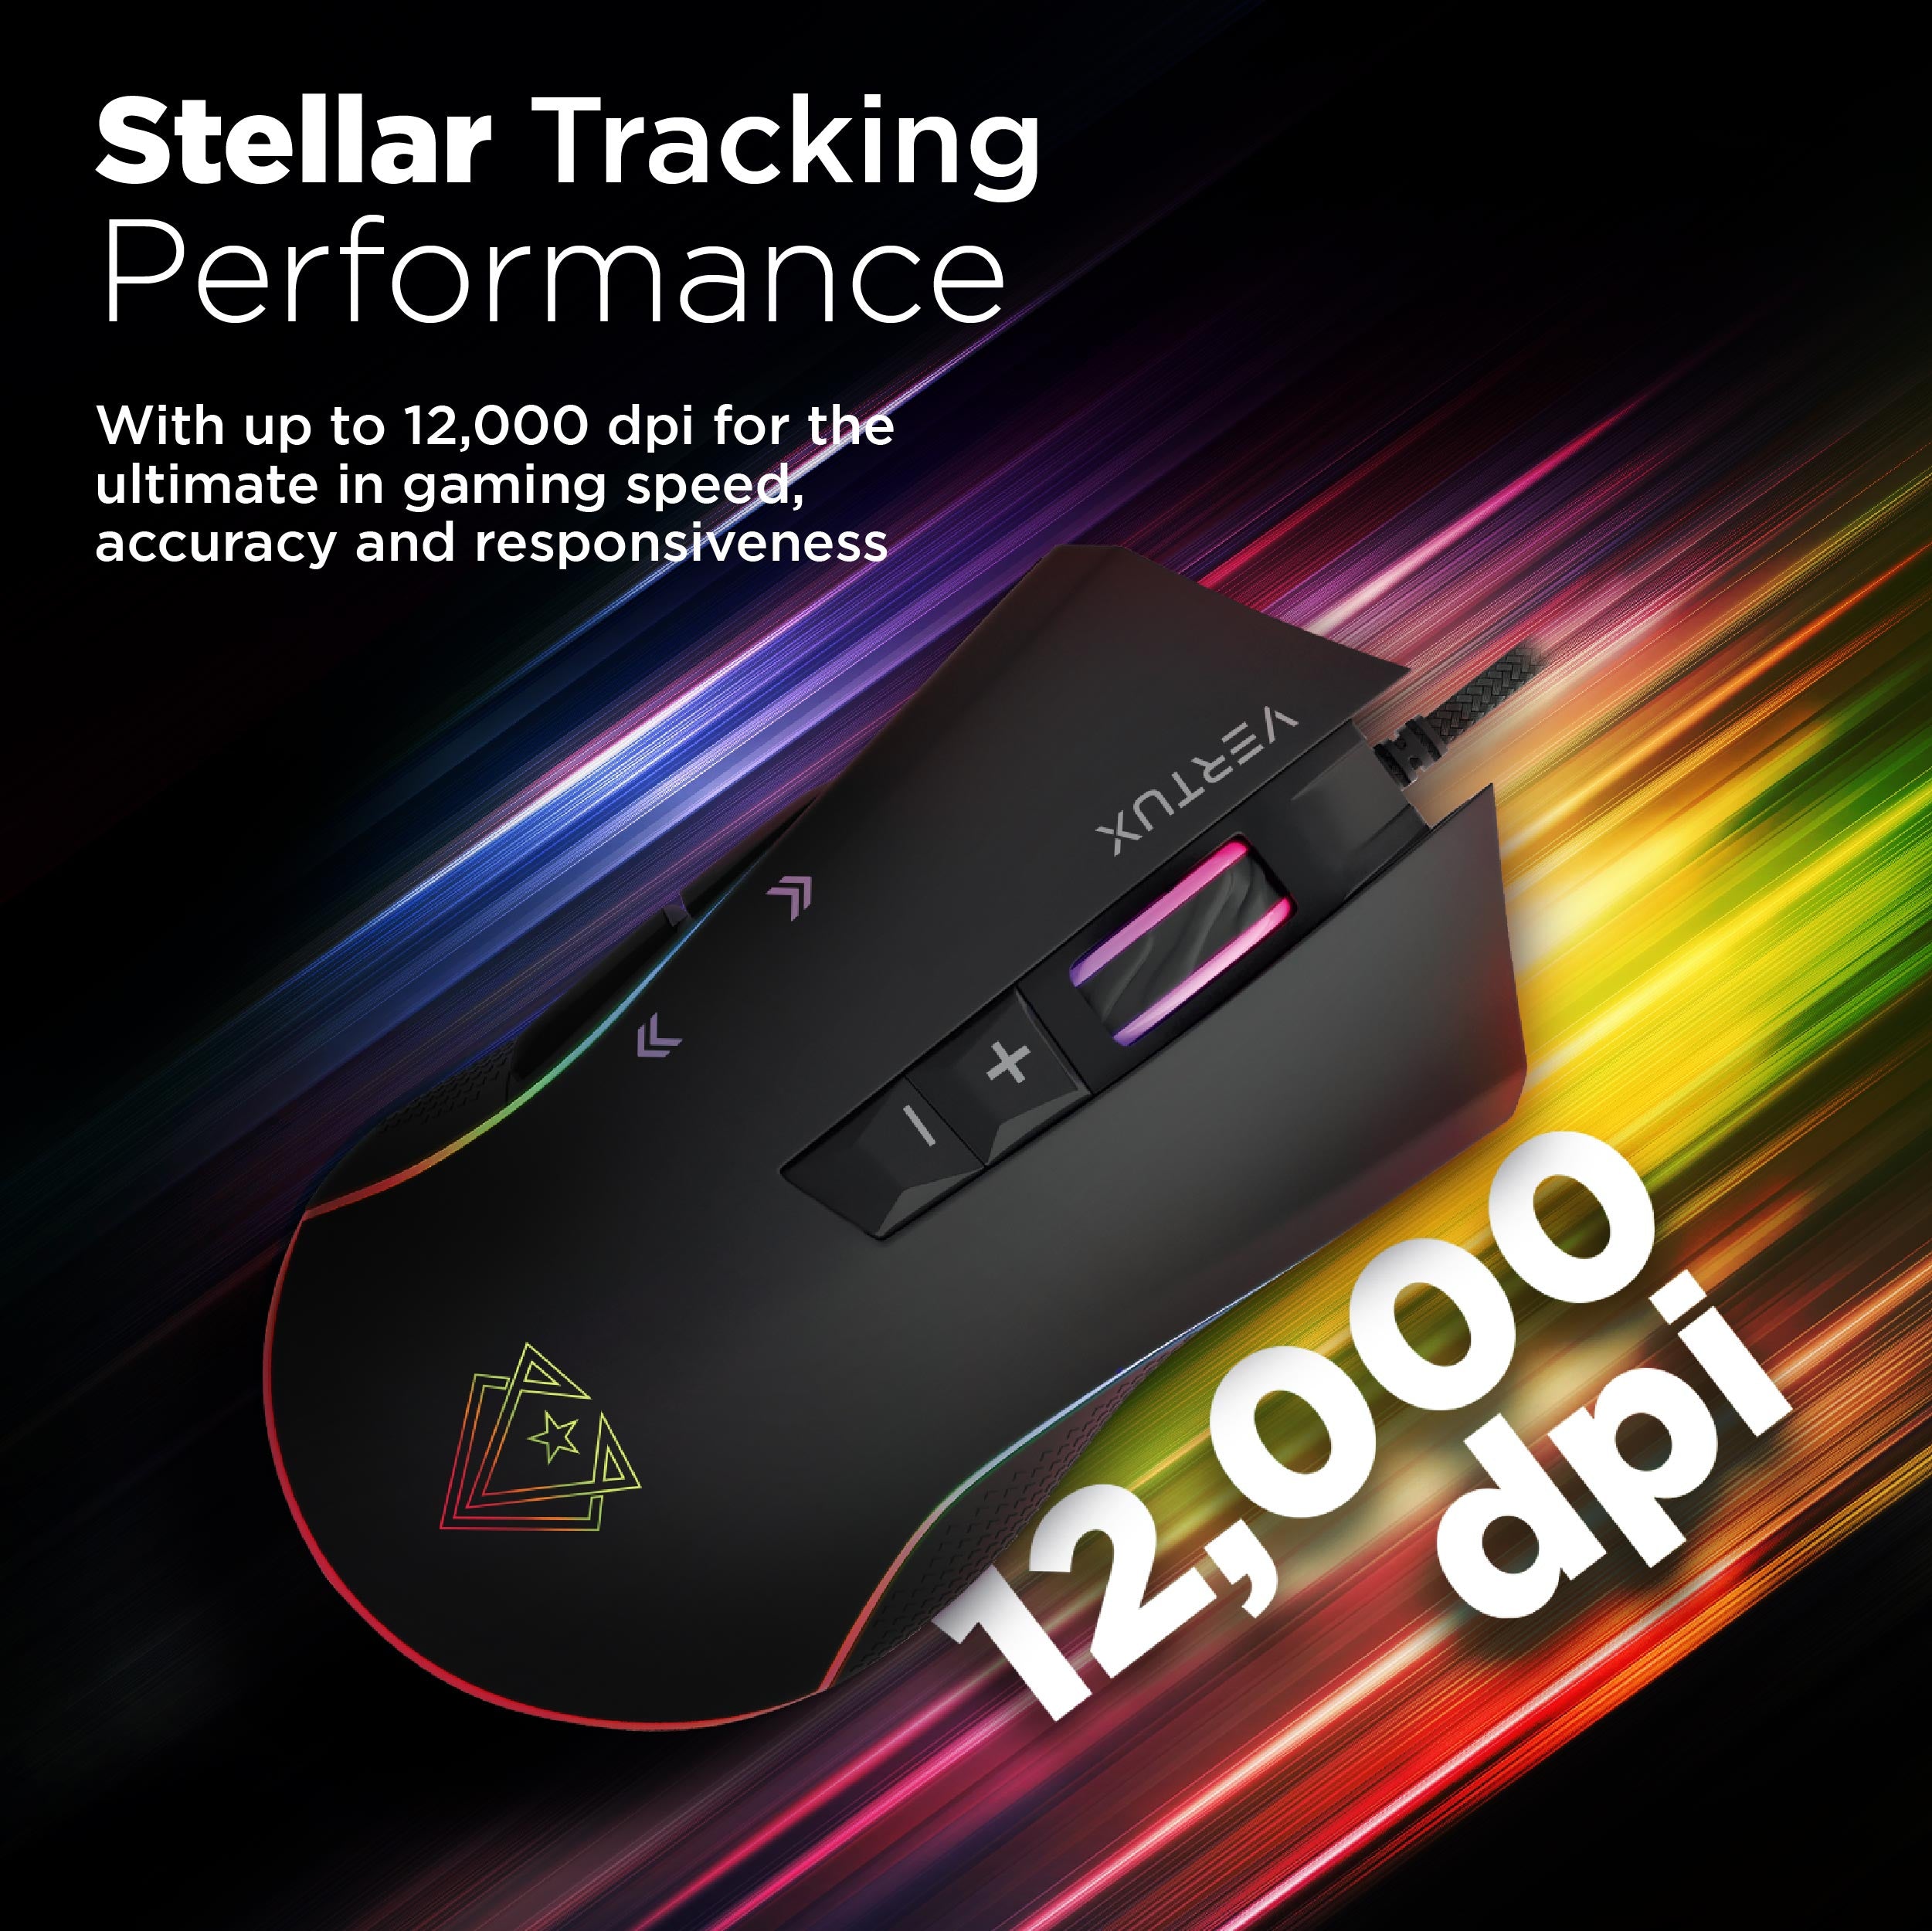 ActFast Ultimate Performance Gaming Mouse